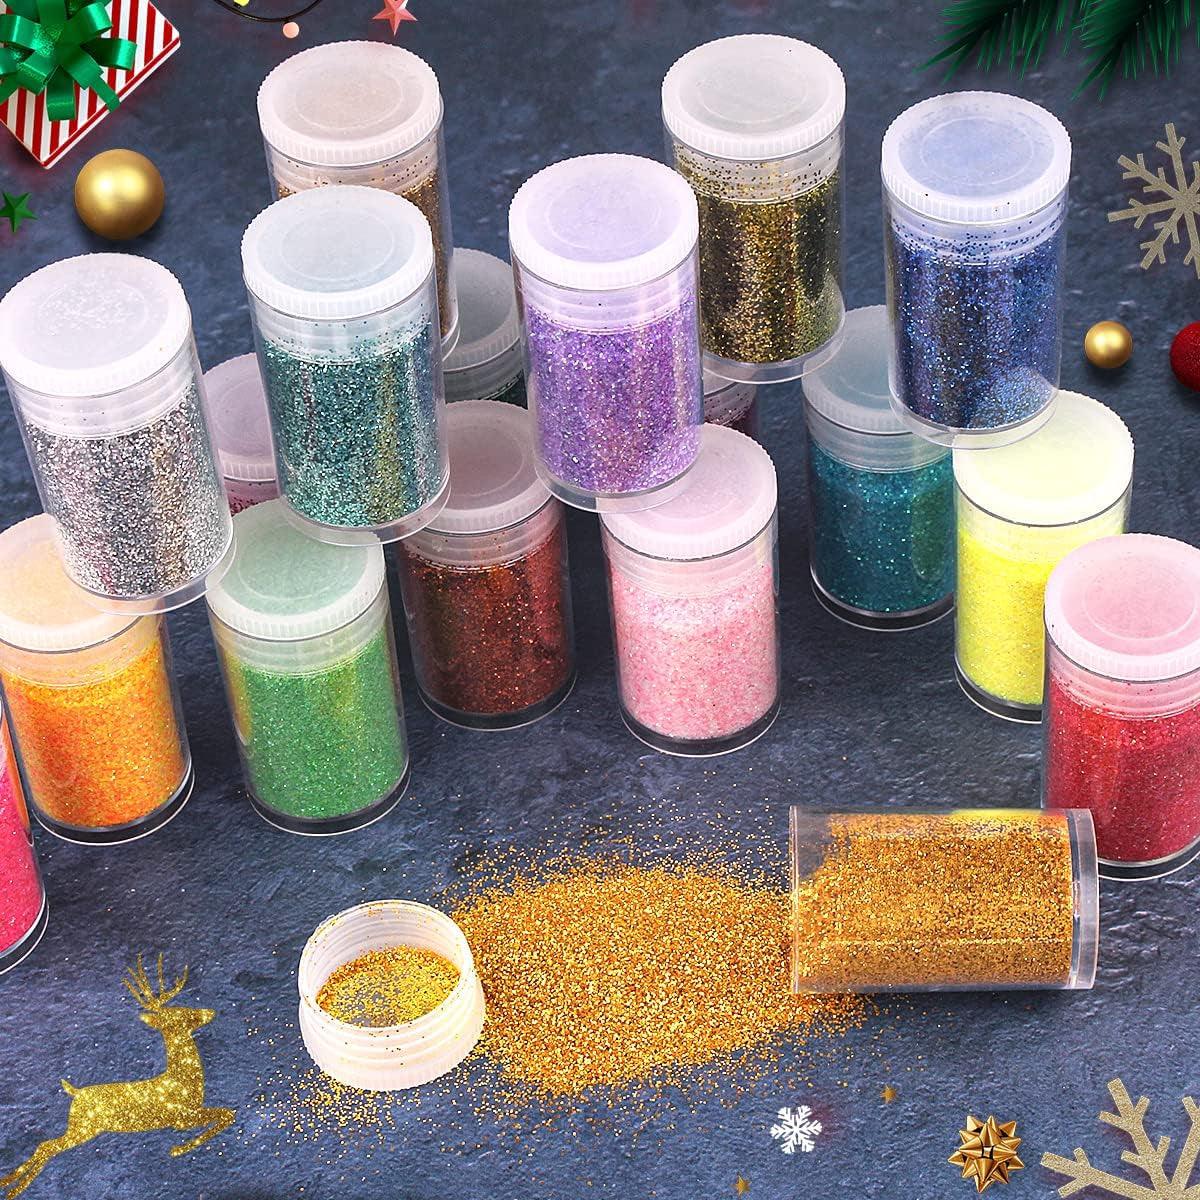 Ultra Fine Glitter 45 Colors Set, Holographic Glitter Powder for Tumblers, Arts and Craft Glitter, Iridescent Glitter for Epoxy Resin, Cosmetic Glitter for Body Nail Face Hair Eyeshadow Makeup - WoodArtSupply